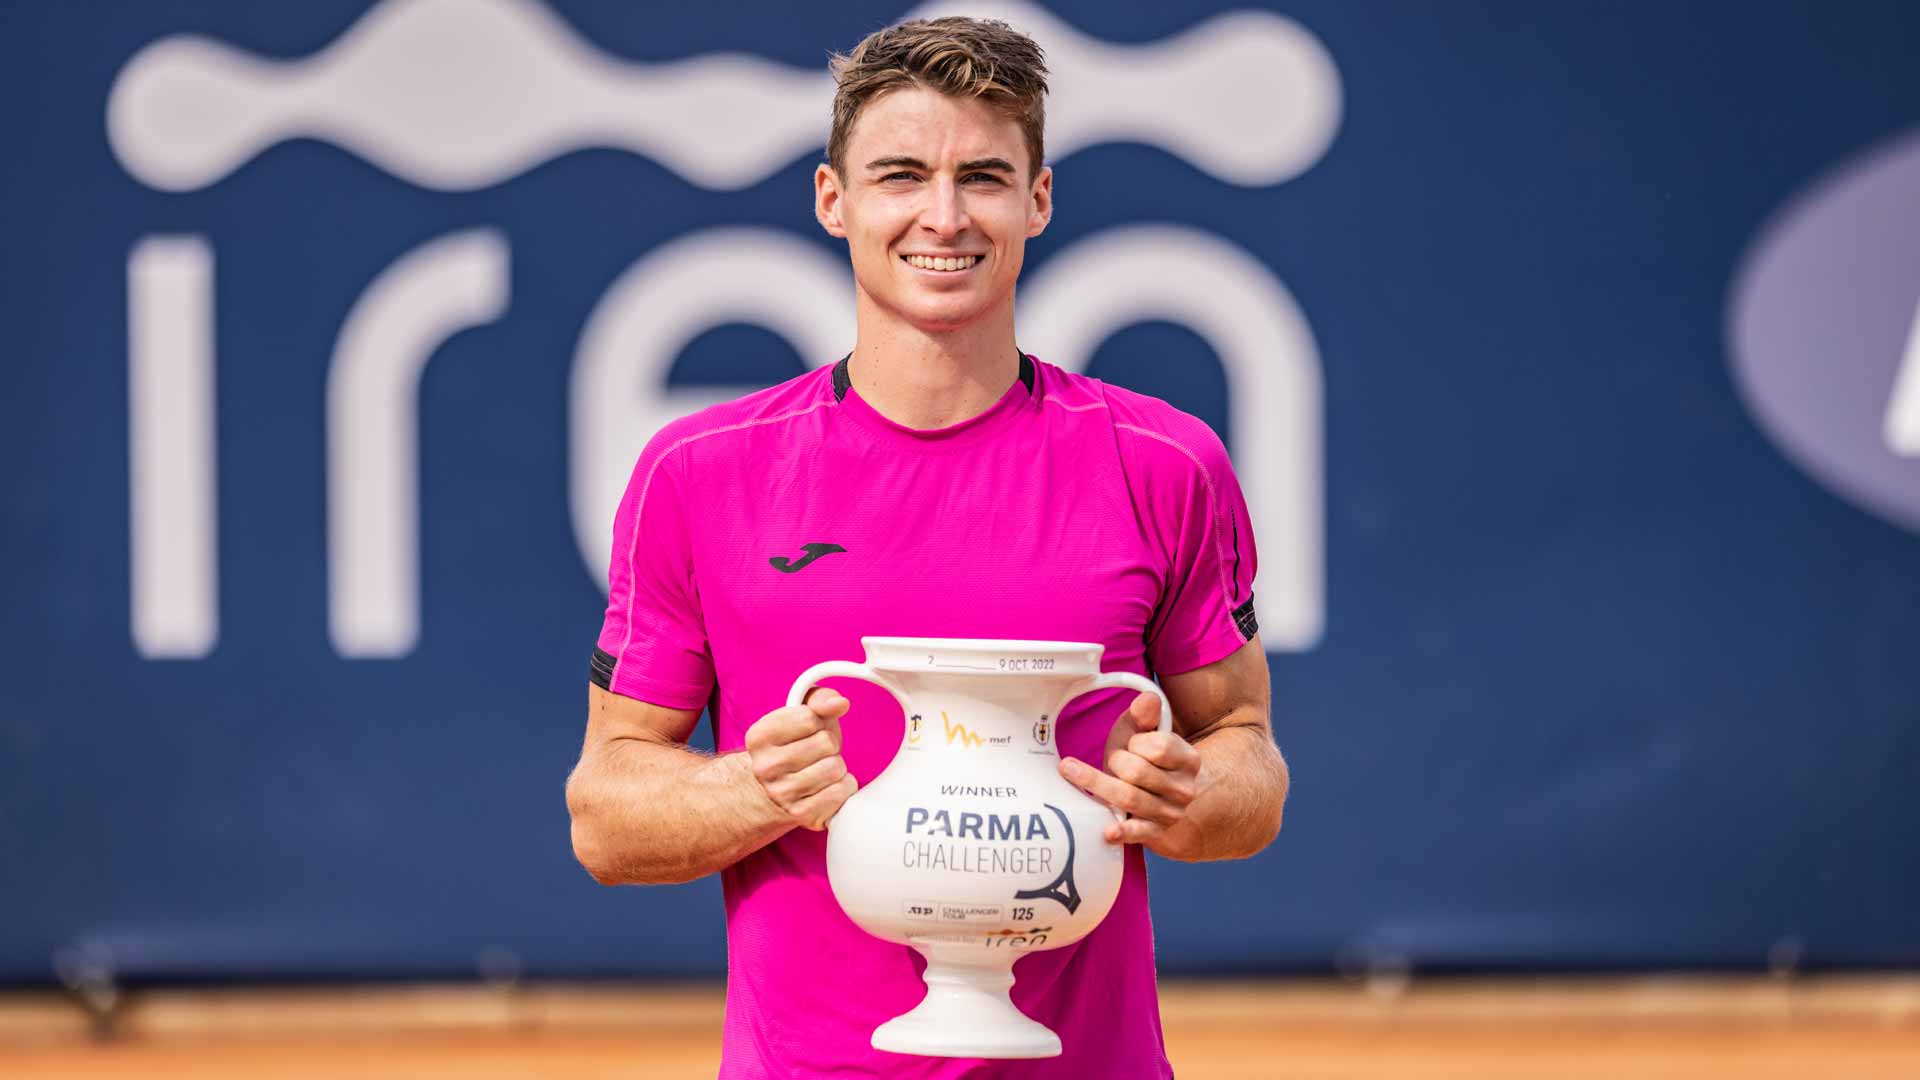 Kazakhstan's Timofey Skatov is crowned champion at the Parma Challenger.